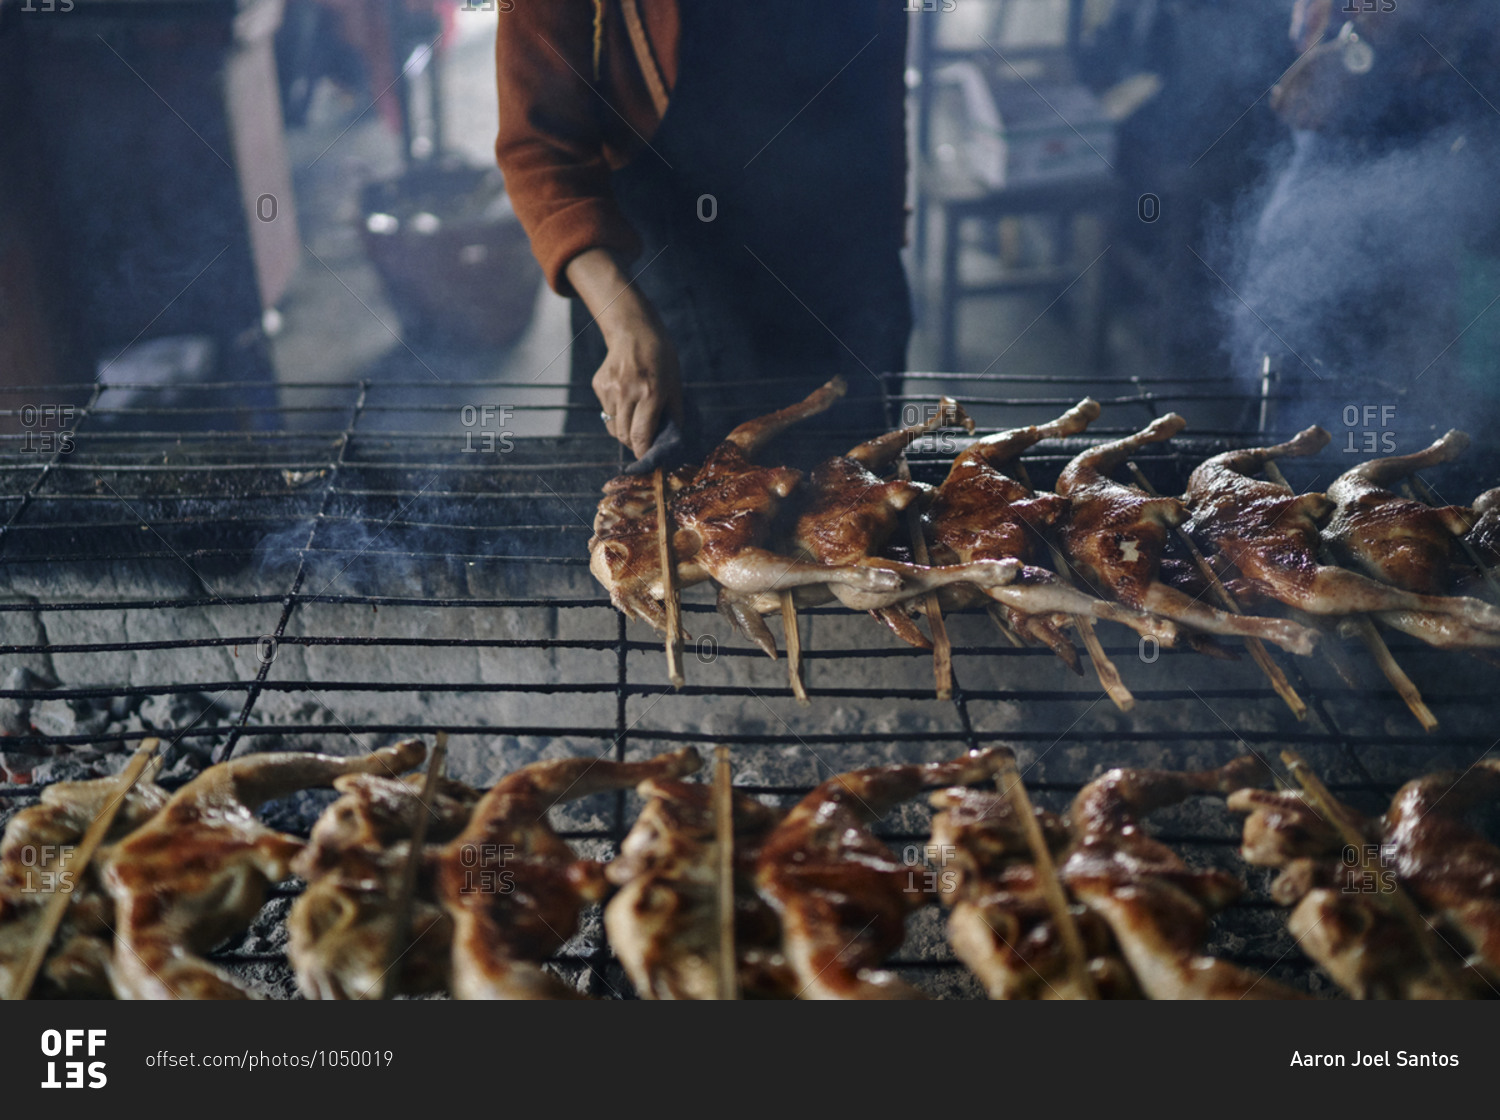 A woman grills chickens over an outdoor fire at a restaurant in Buriram, Thailand